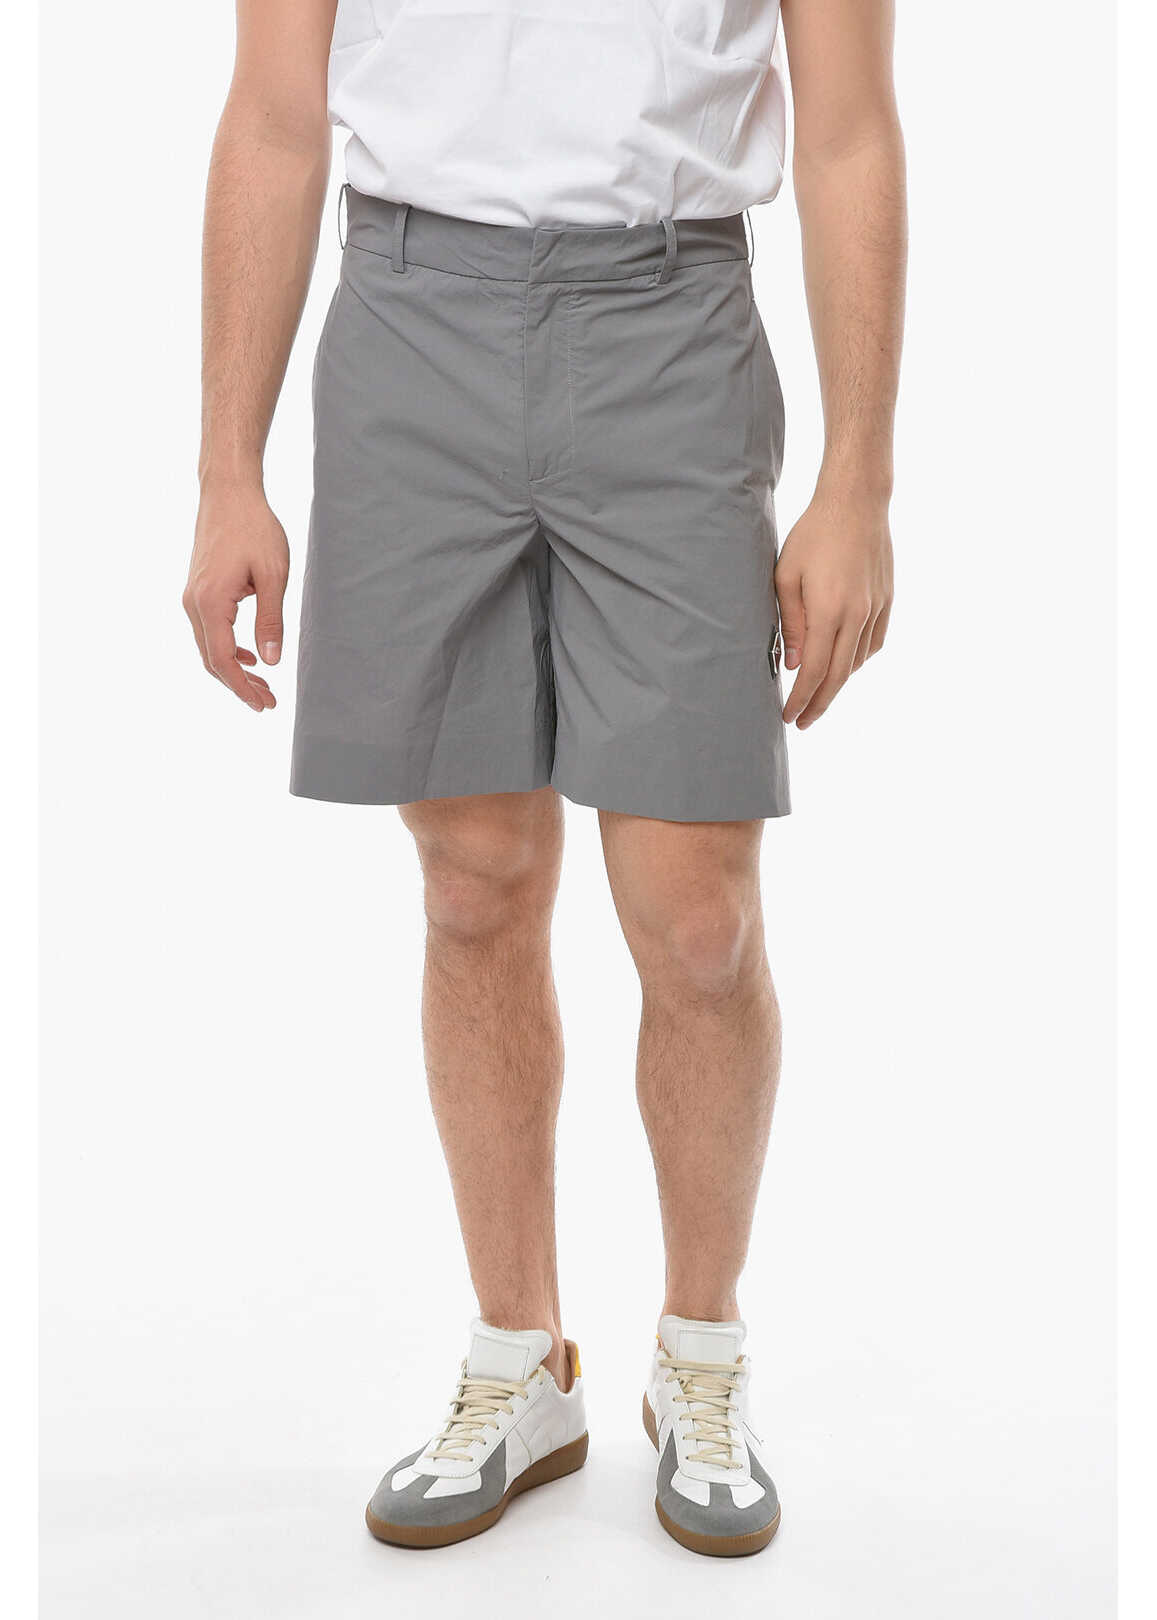 A-COLD-WALL* Samuel Ross Belt Loops Stretch Nylon Shorts Gray